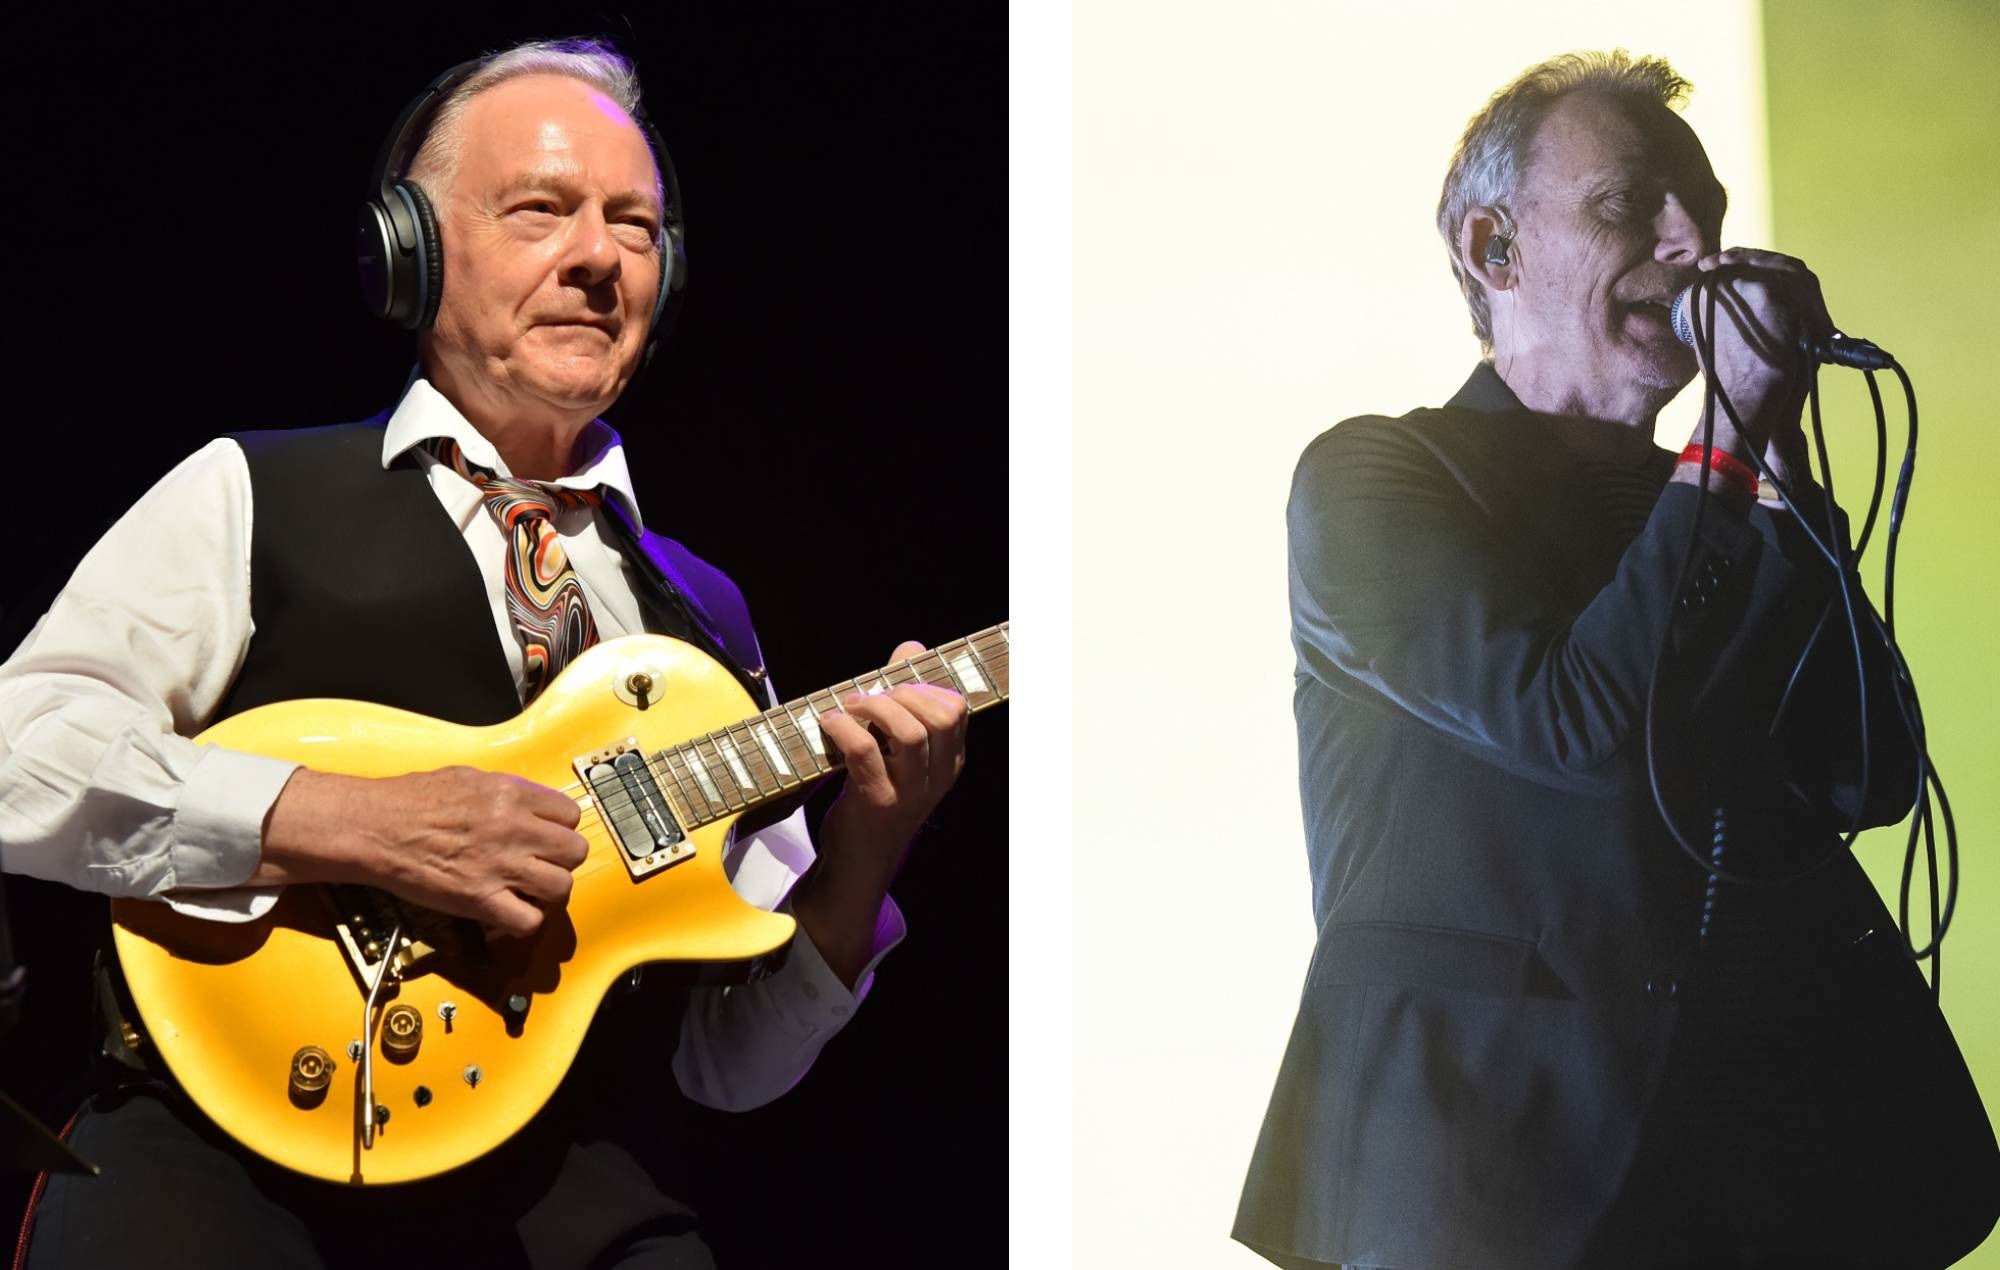 Robert Fripp and The Jesus And Mary Chain lead artists suing PRS over songwriter royalties